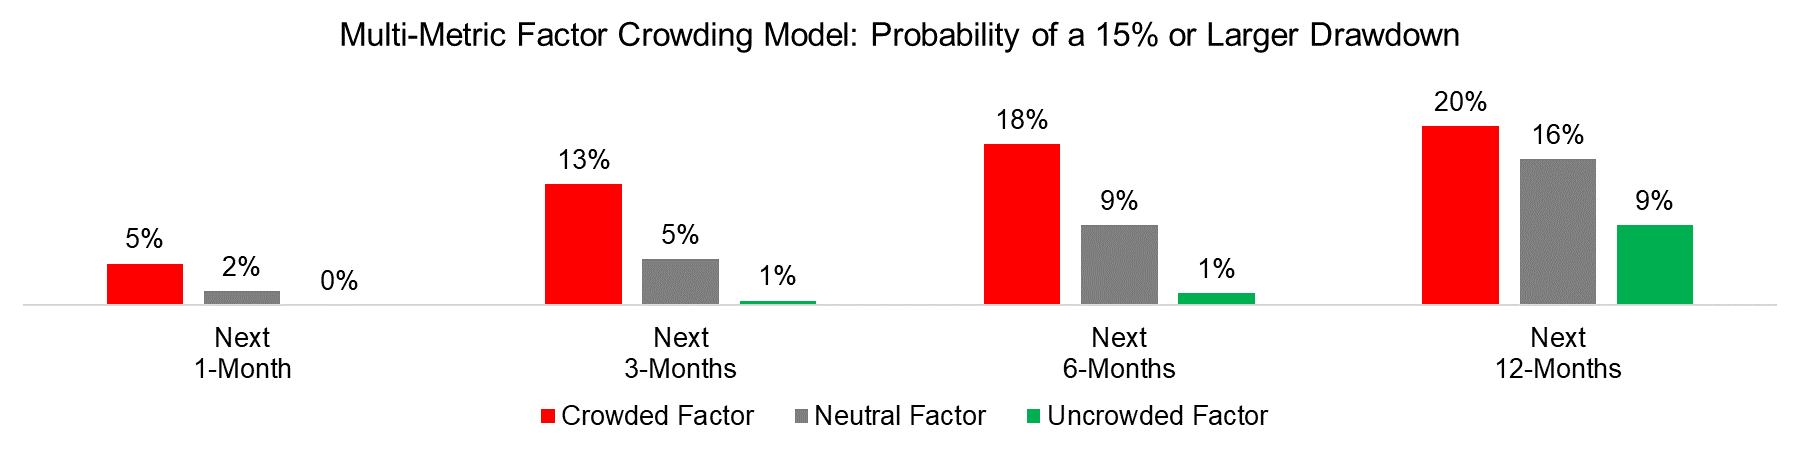 Multi-Metric Factor Crowding Model Probability of a 15% or Larger Drawdown